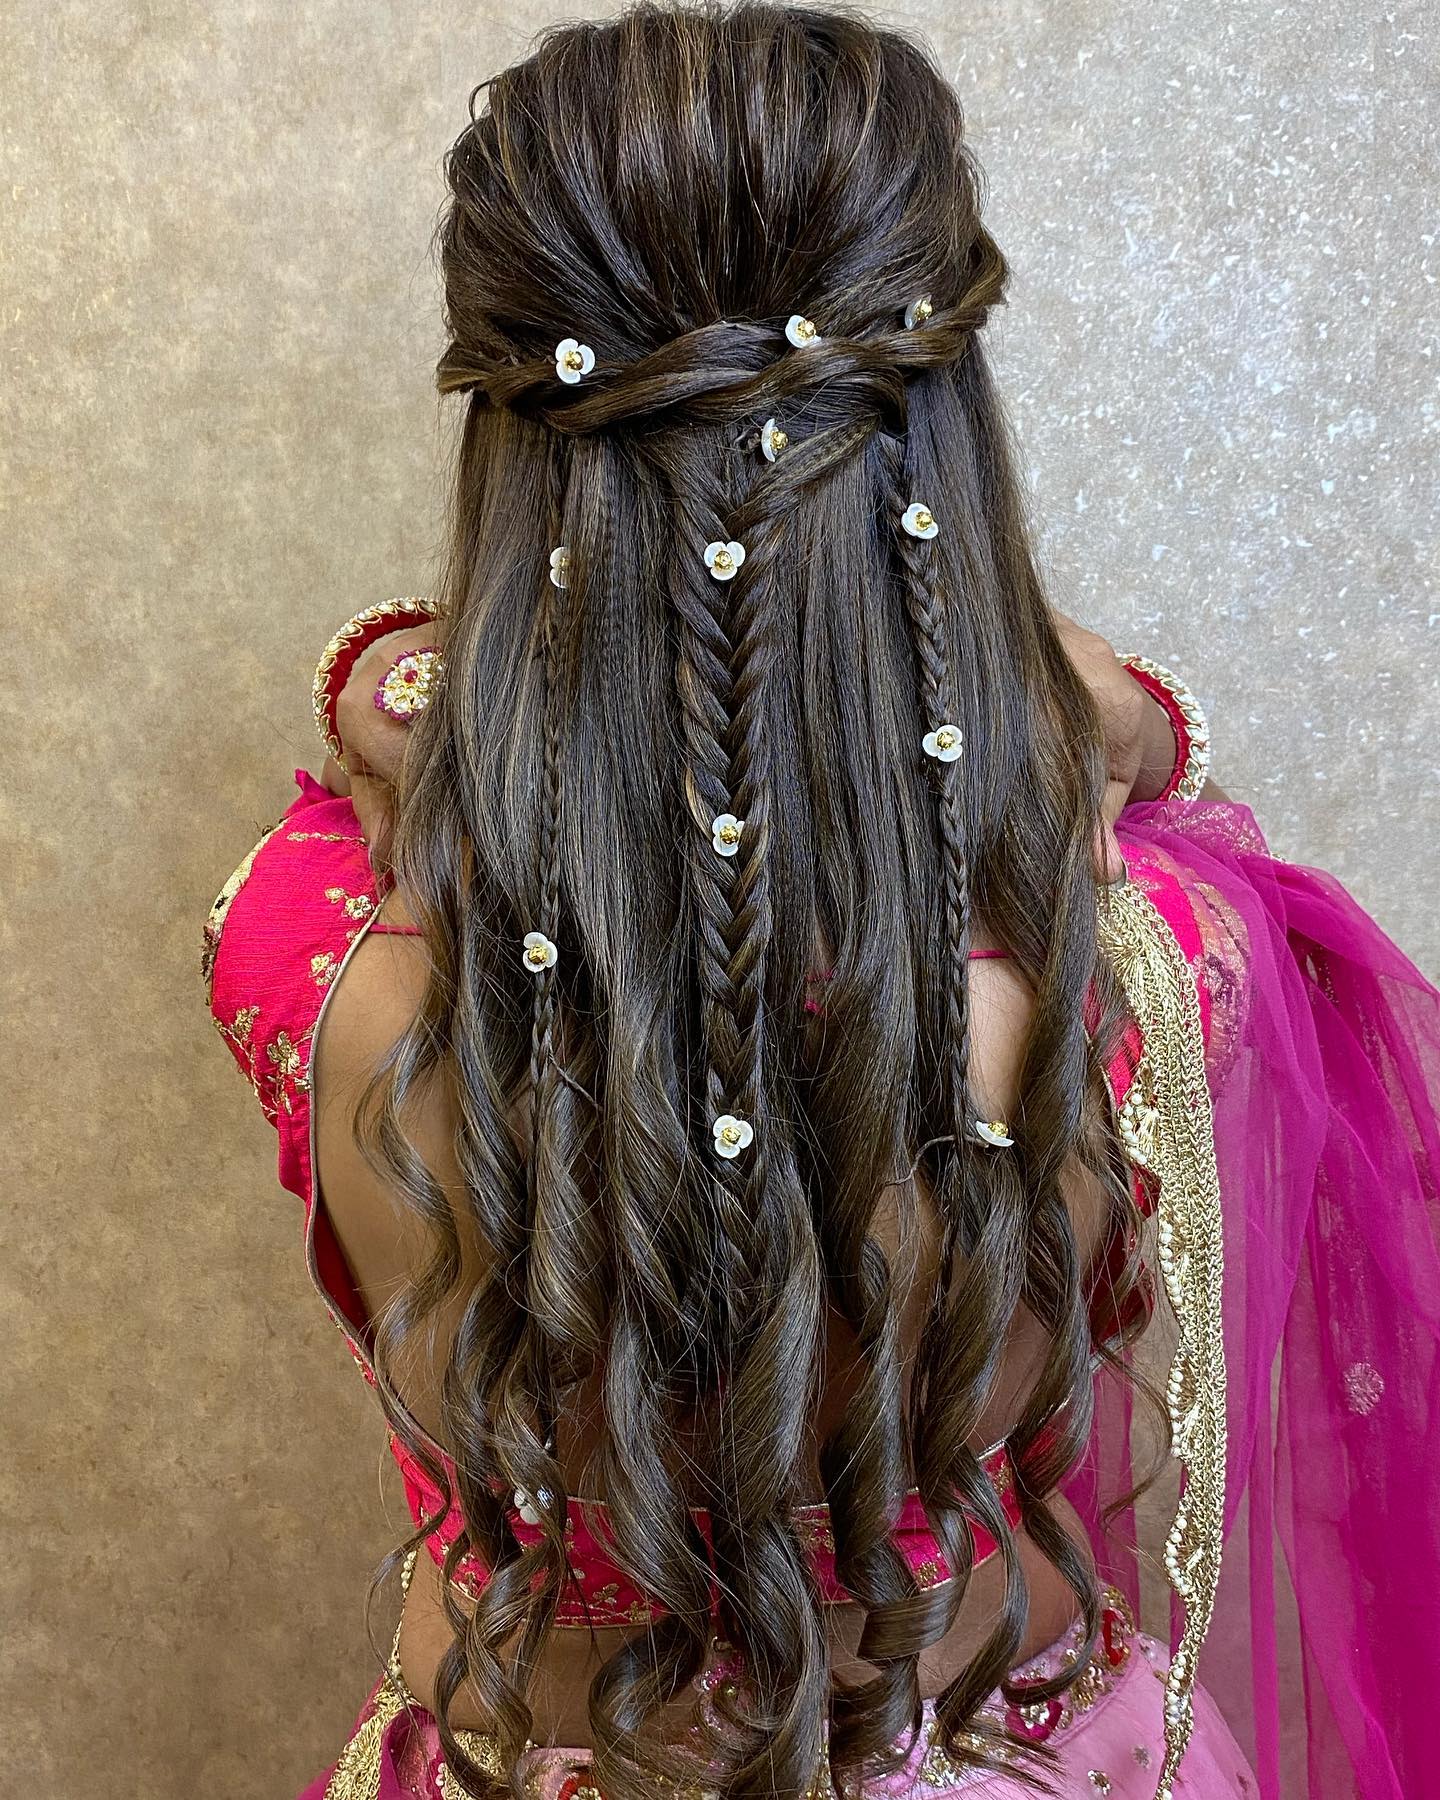 Delicate Braids and Curls w/ Decorative Beads